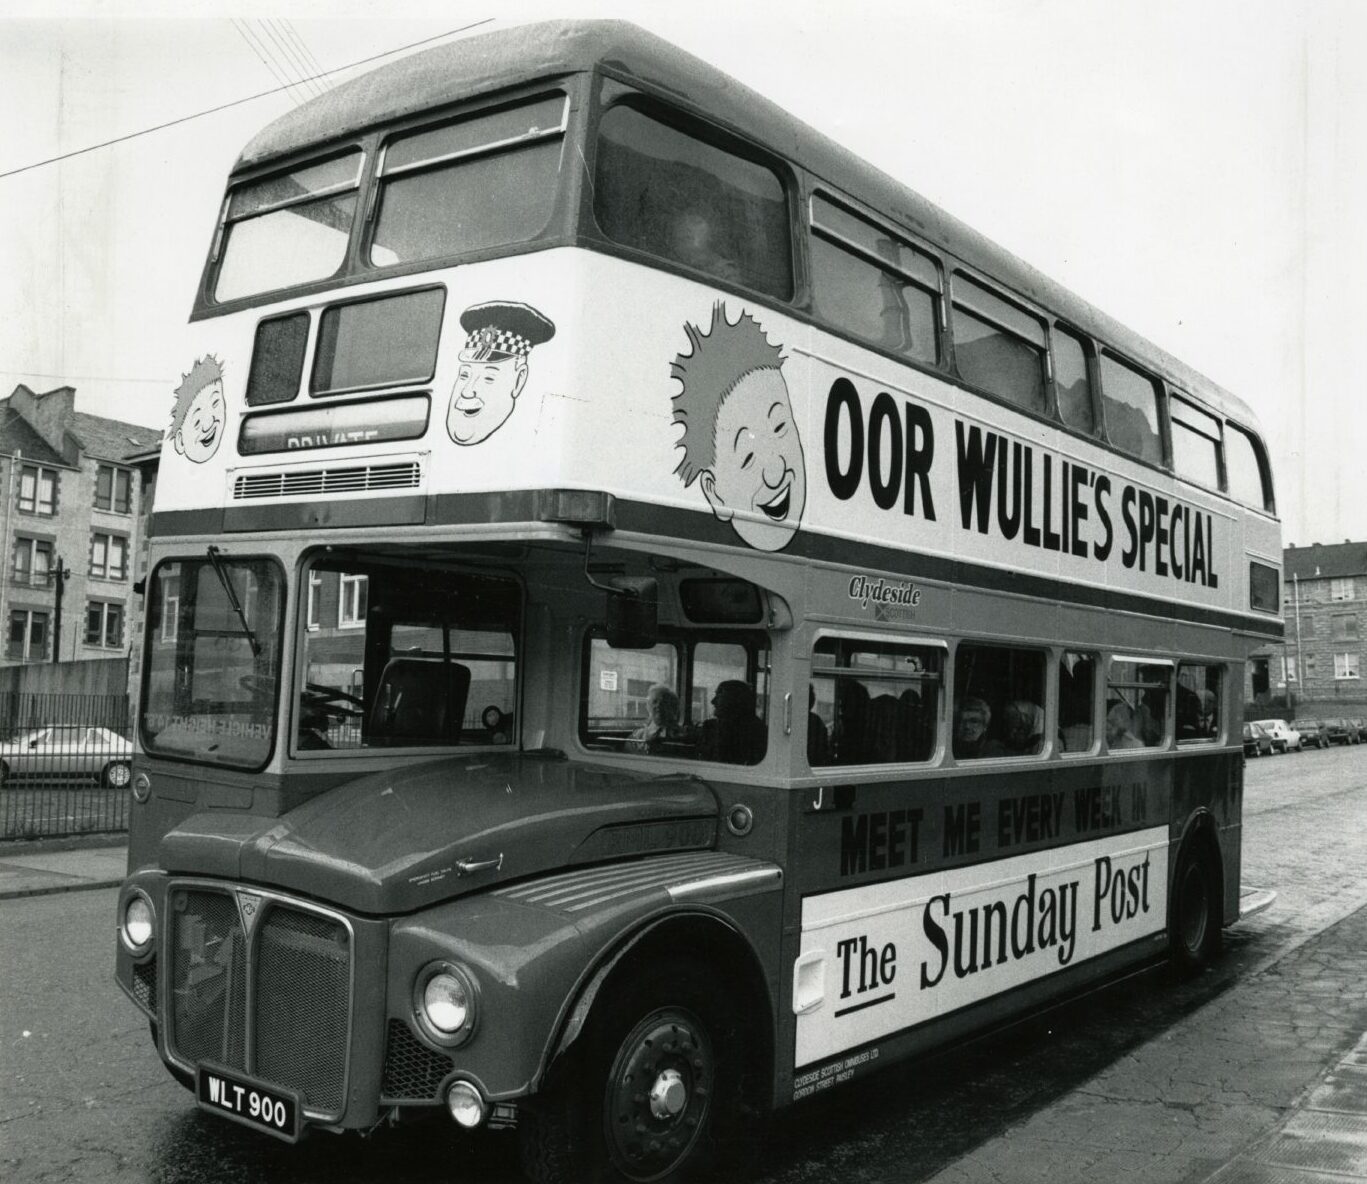 The Oor Wullie Special Bus parked on a street in Dundee.